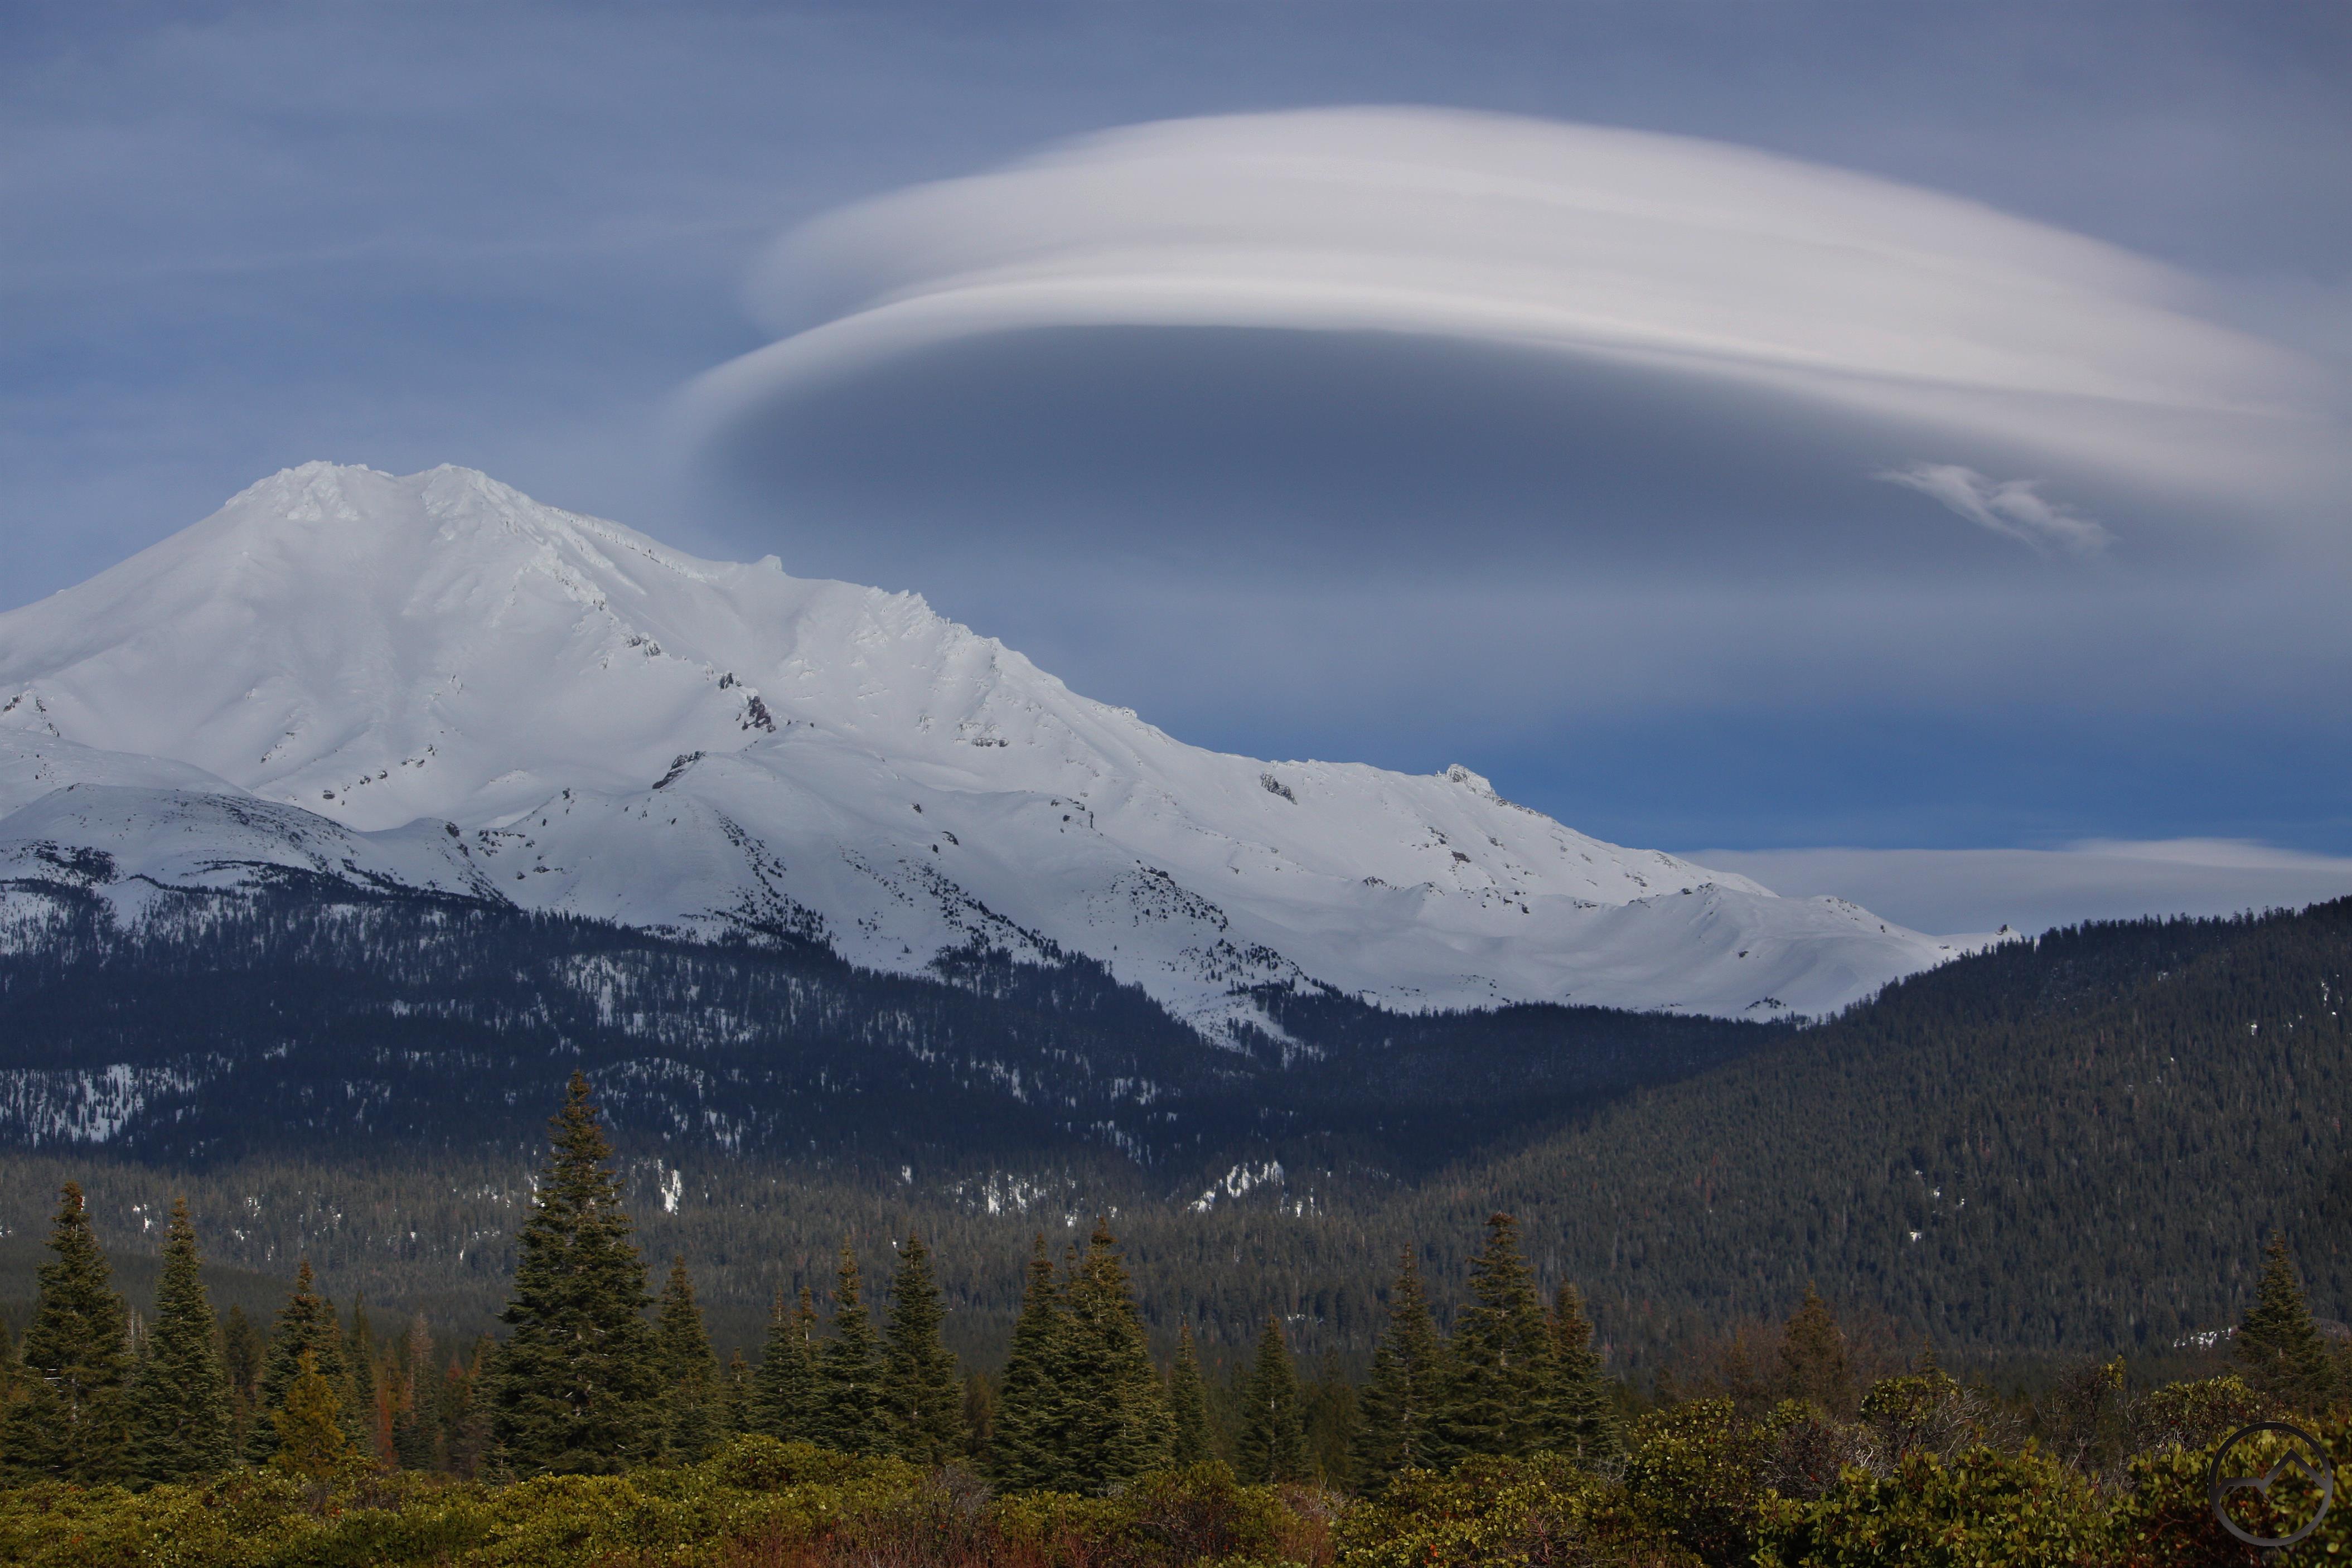 One of the pleasures of living near Mount Shasta is the opportunity to obse...